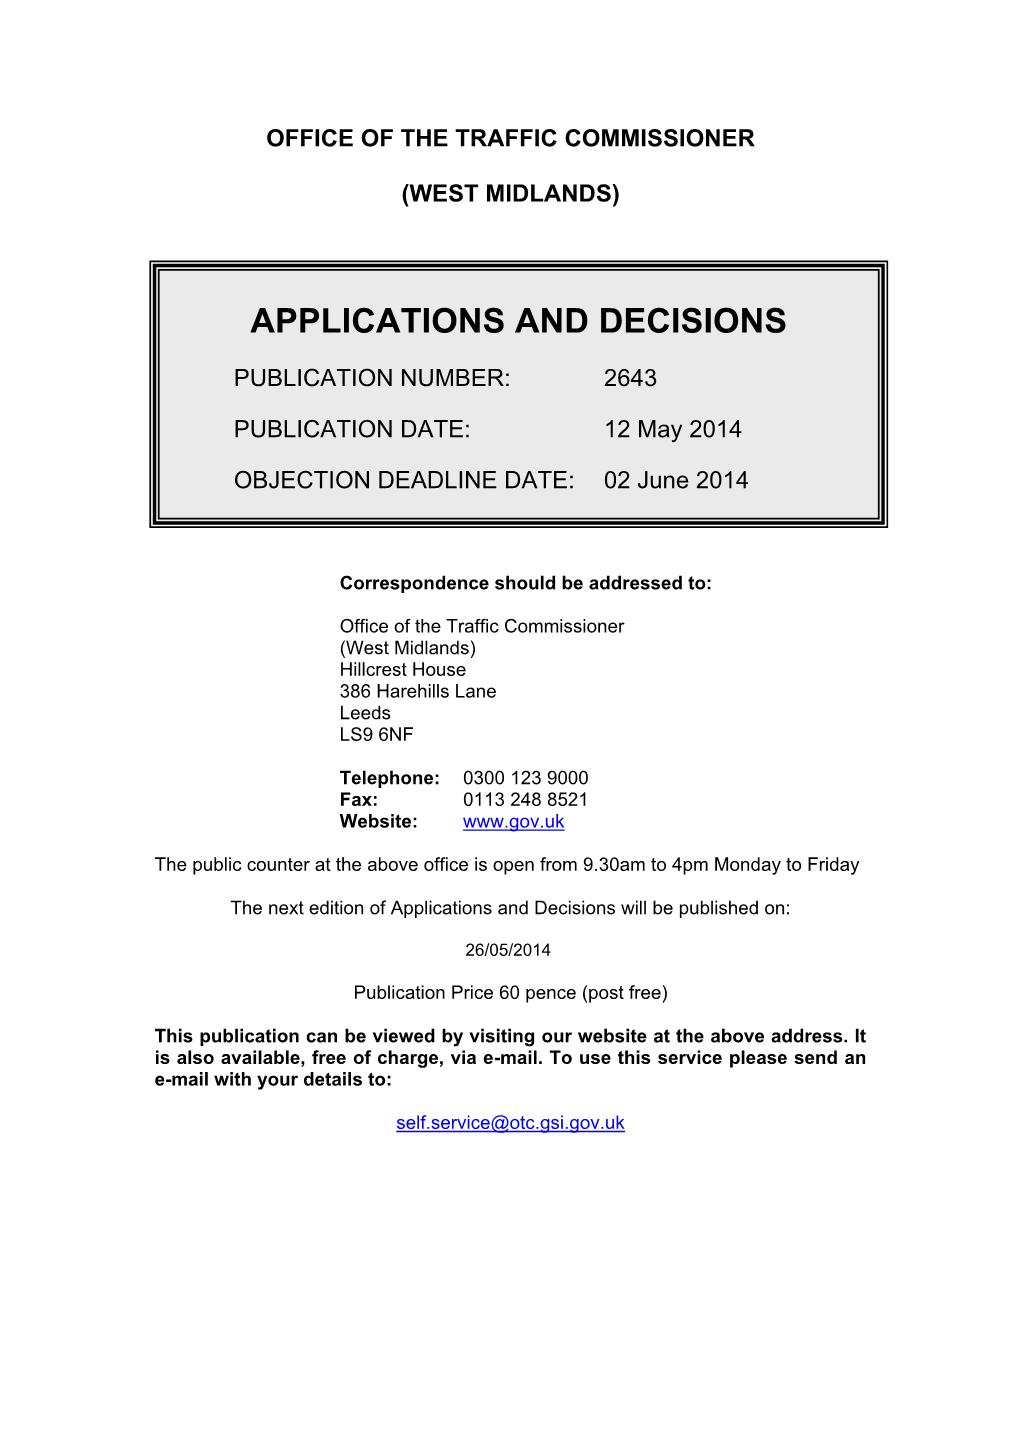 Applications and Decisions: West Midlands: 12 May 2014